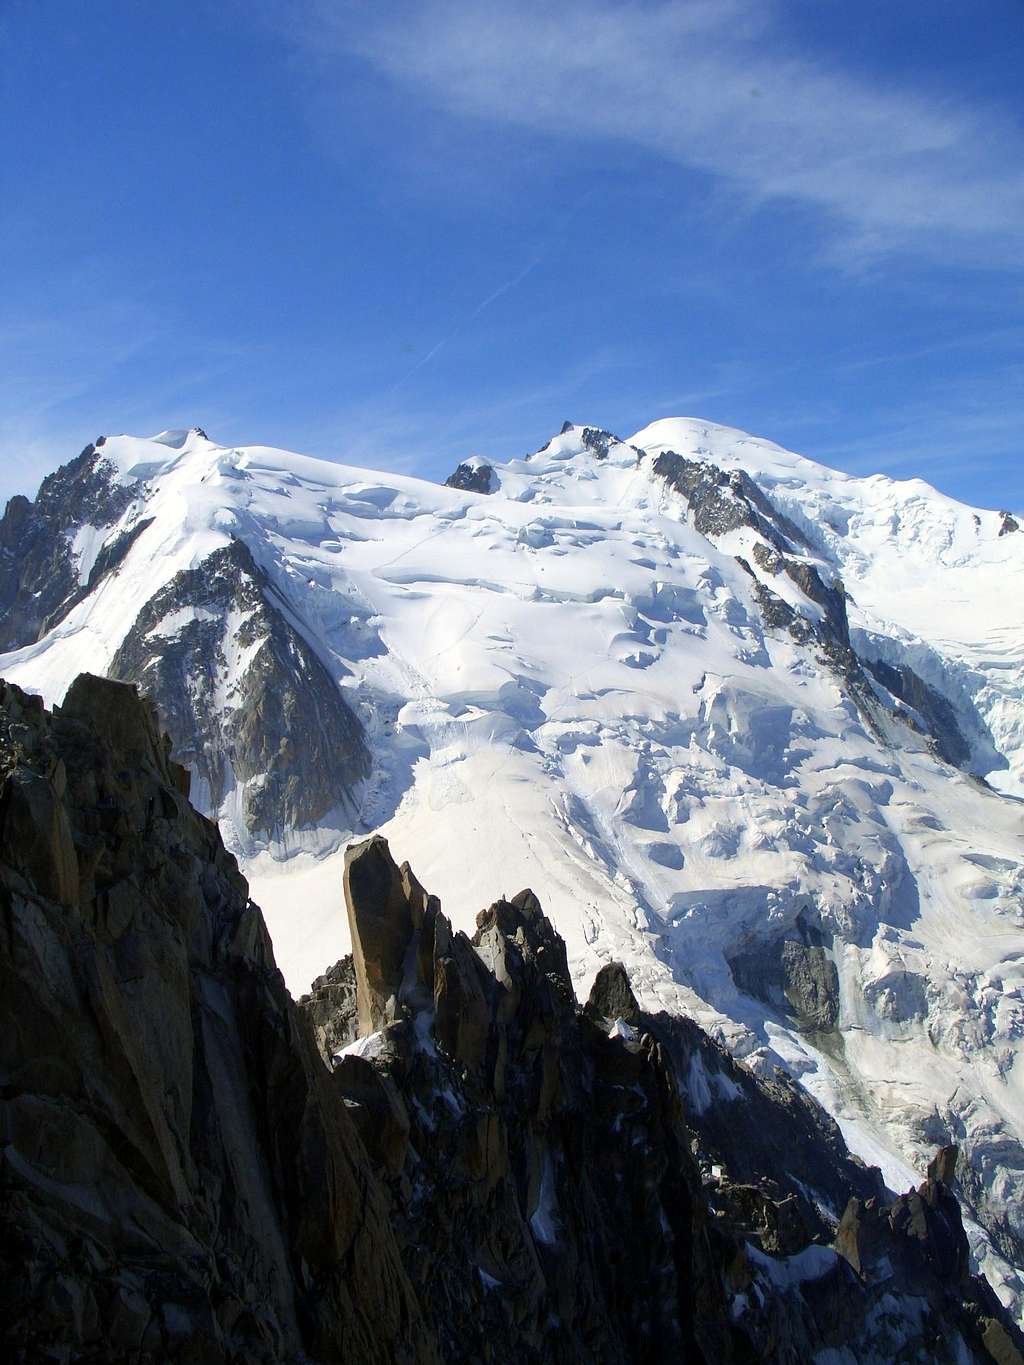 The Three Mont Blanc seen from Aiguille du Midi